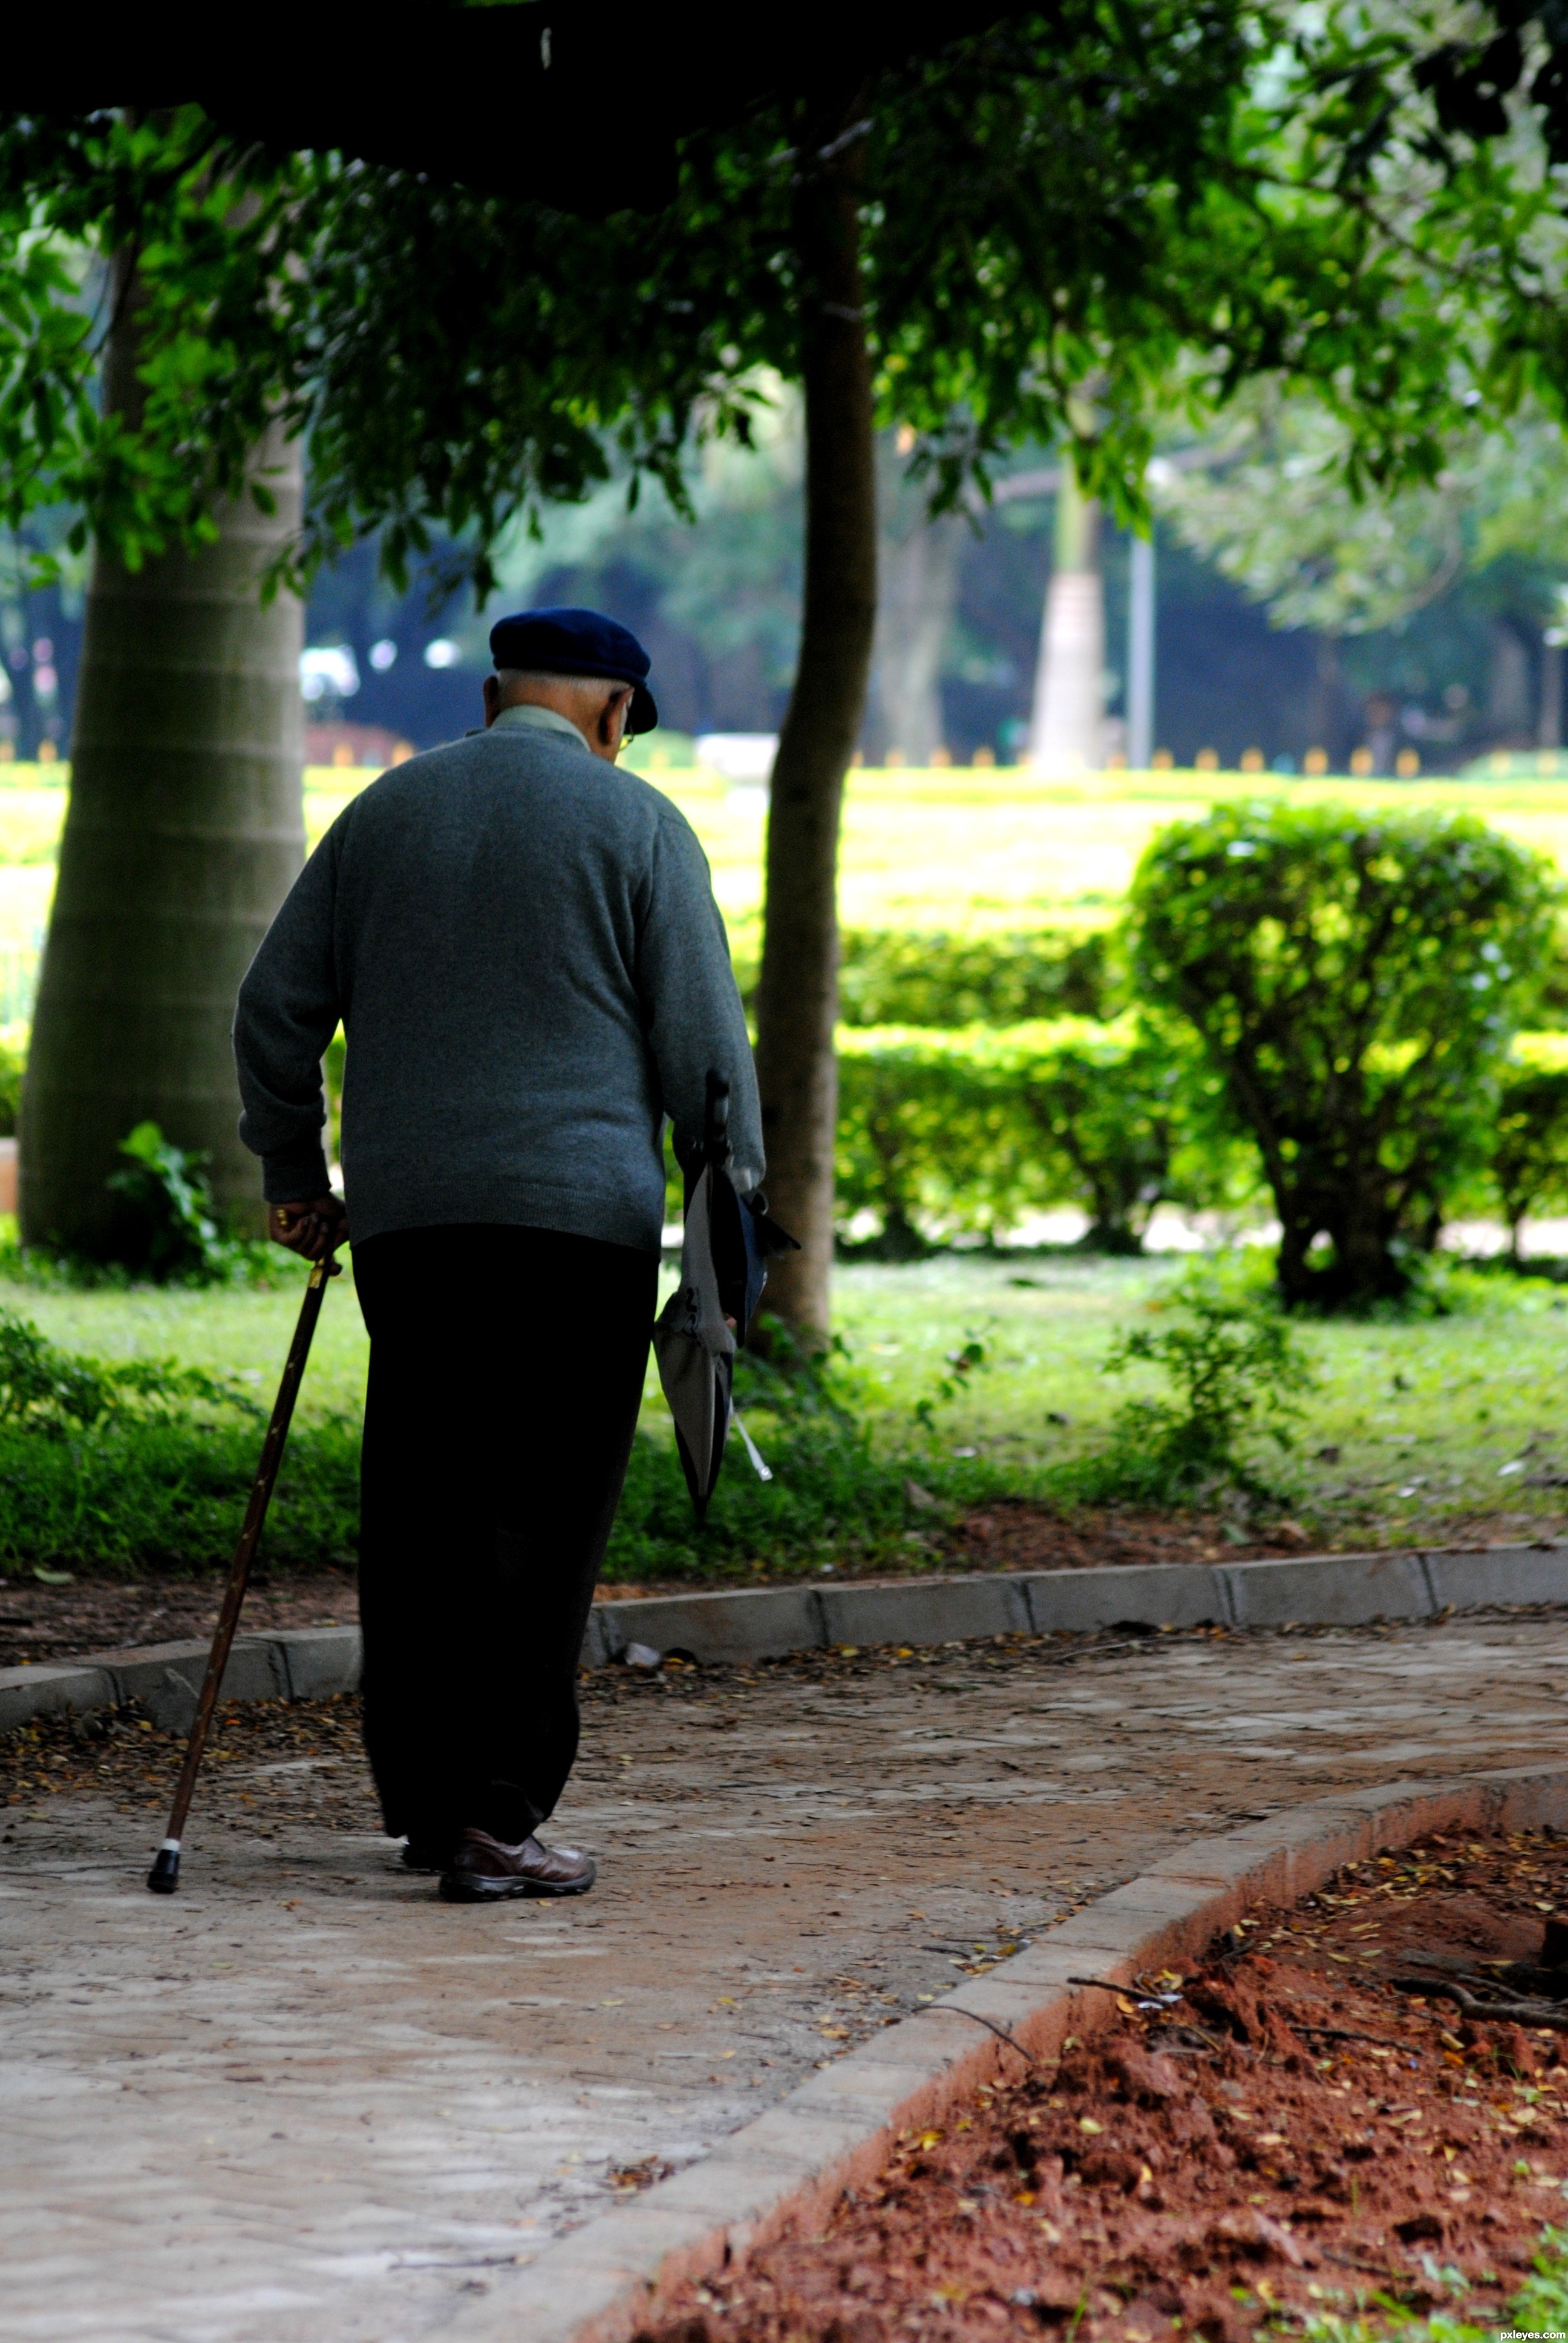 Old man walking.. picture, by arbroono for: from behind photography ...